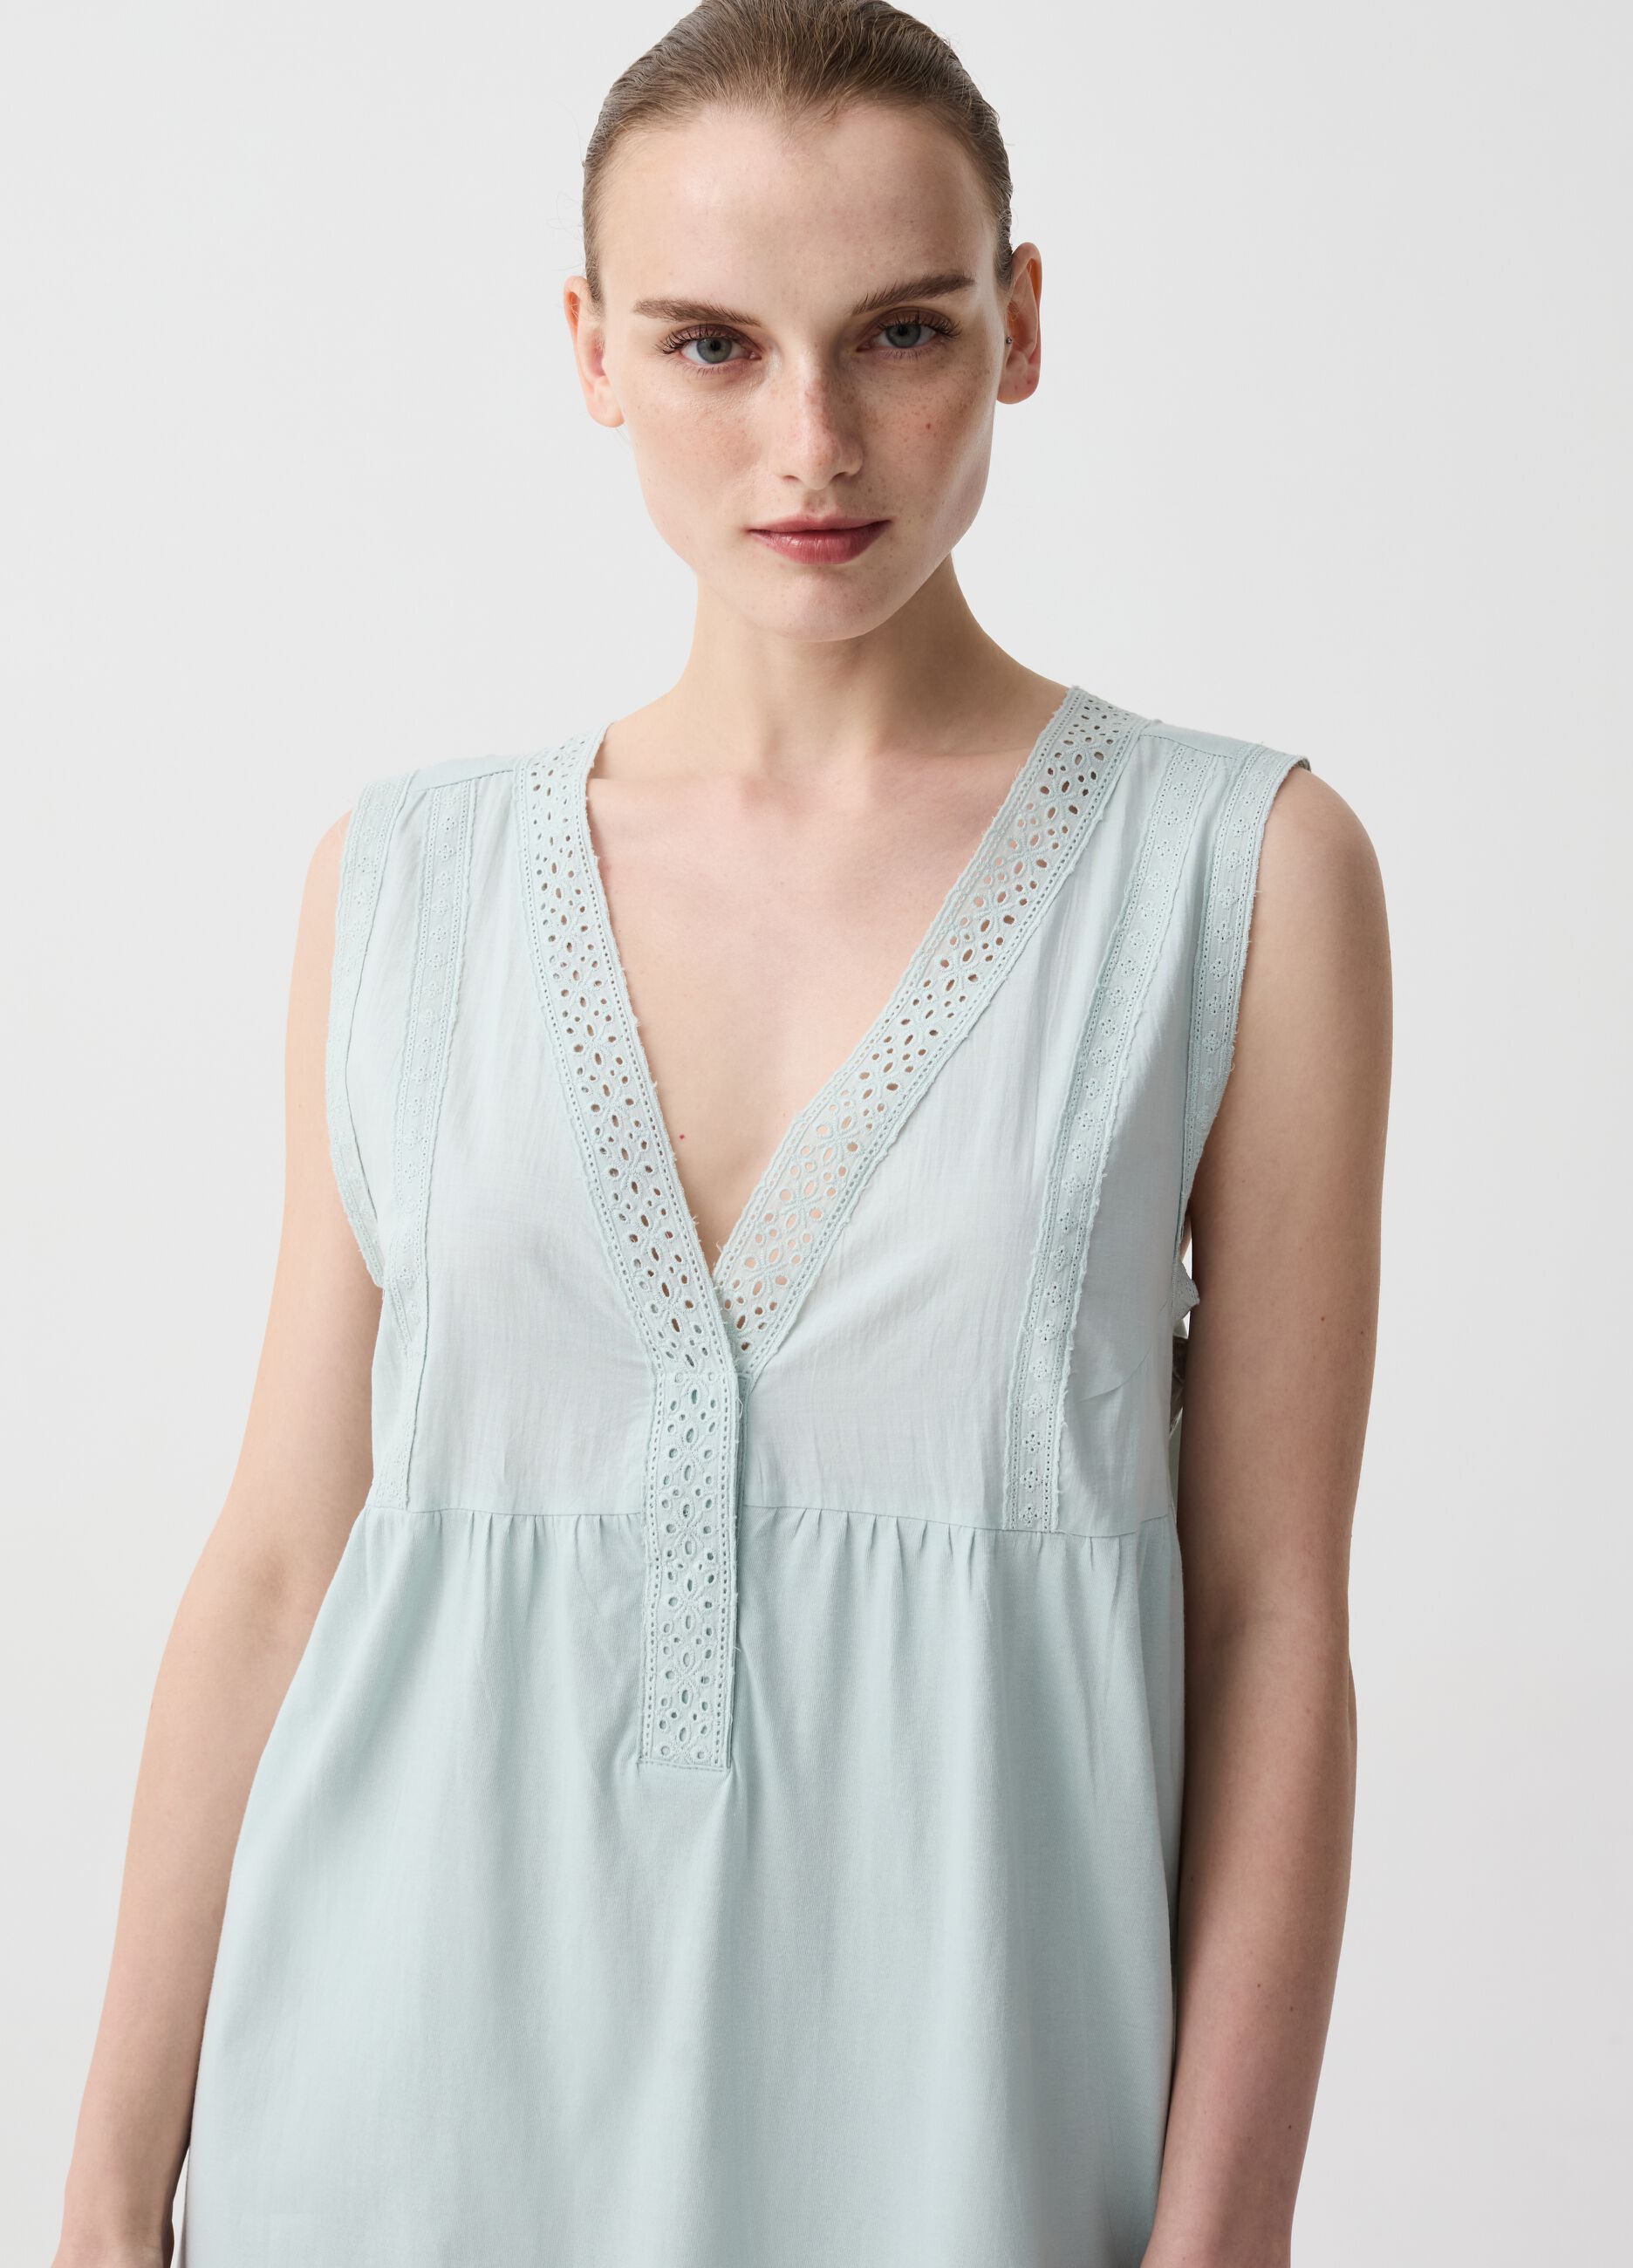 Nightdress with V neck and broderie anglaise